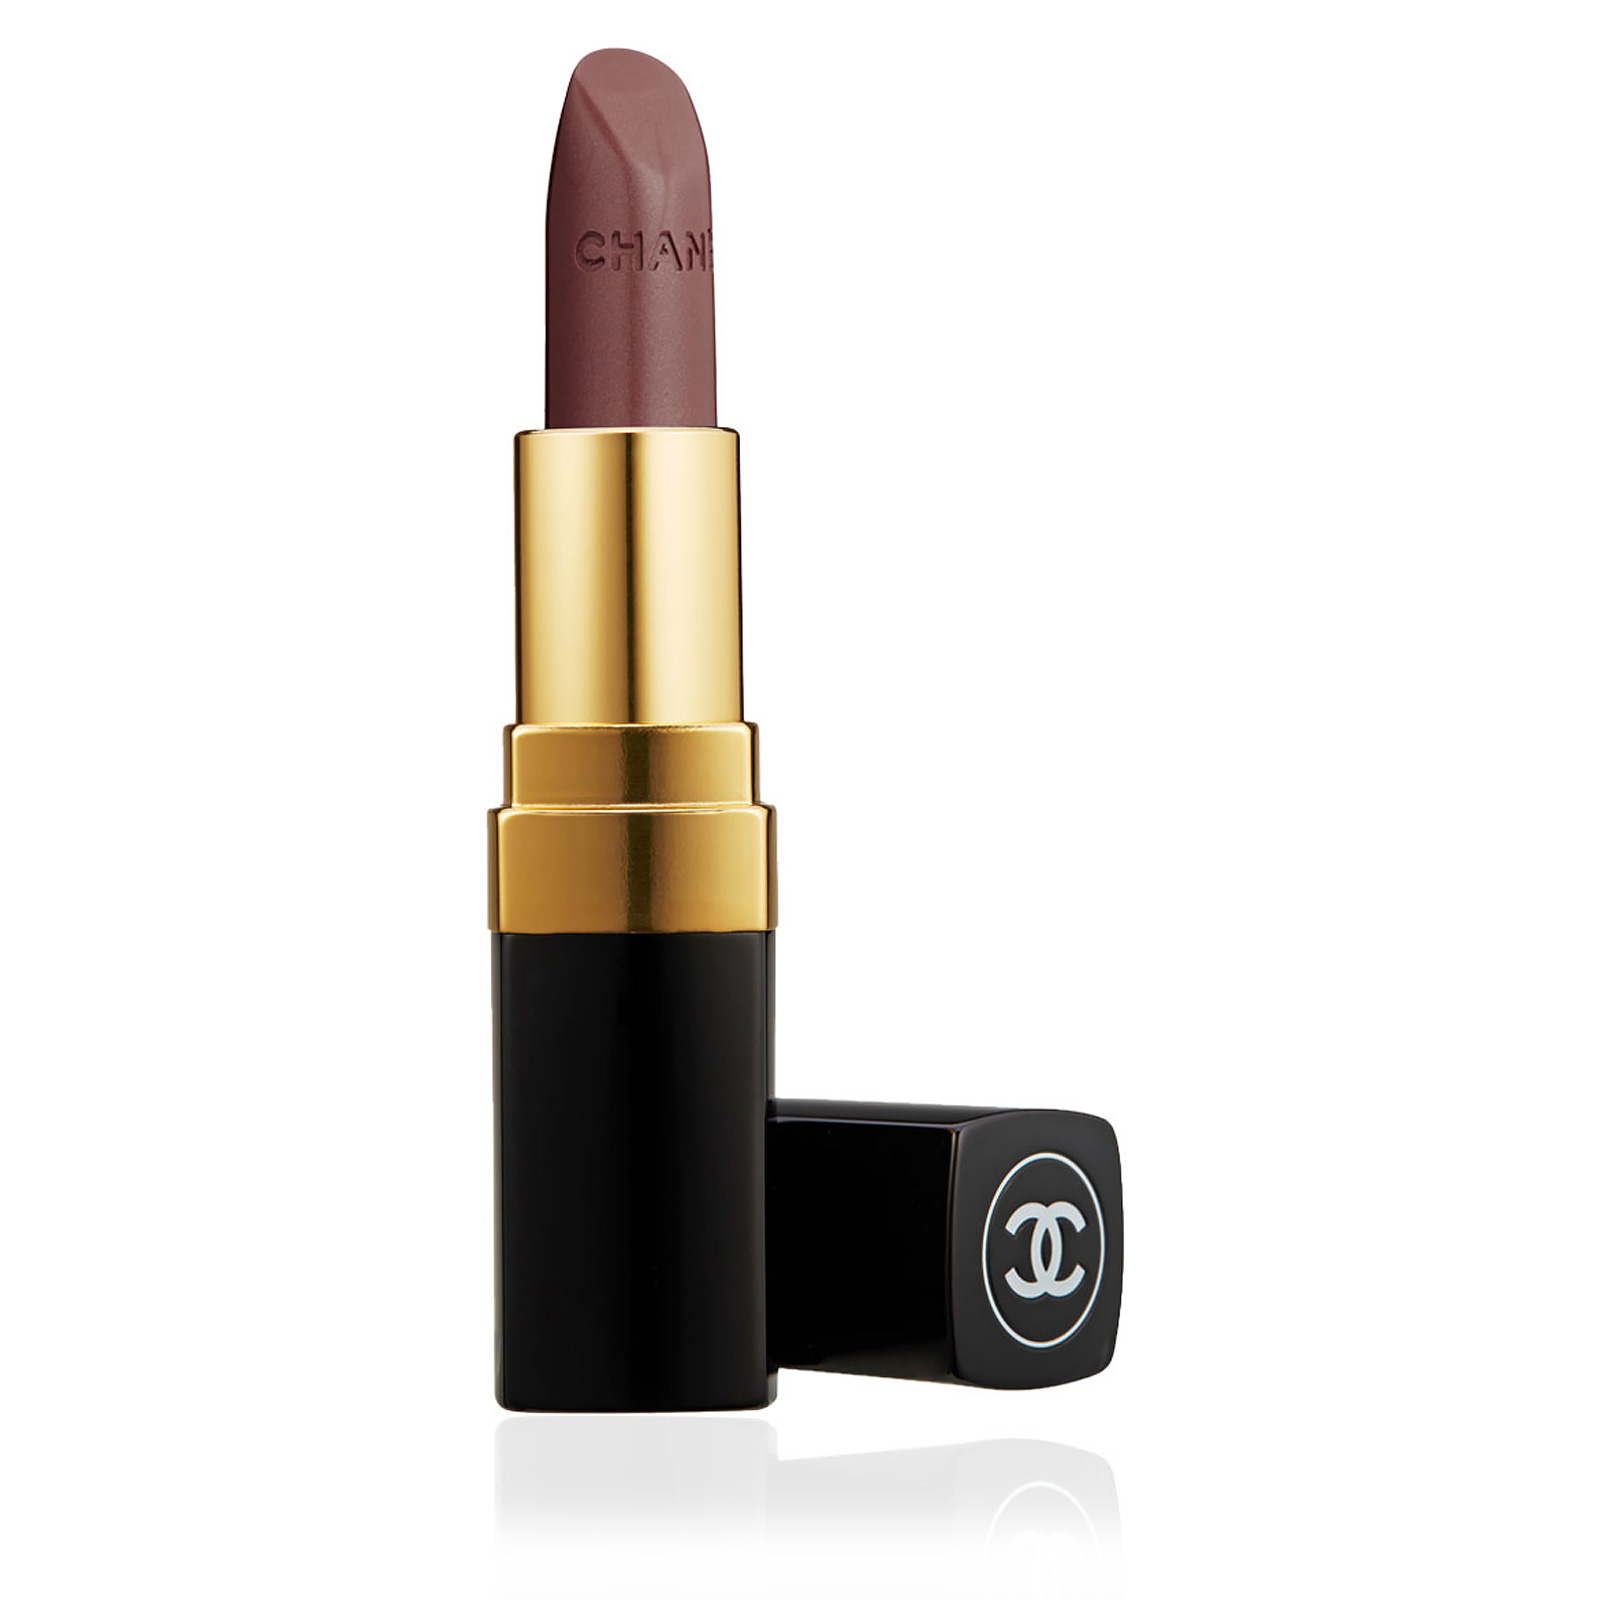 Chanel Rouge Coco Ultra Hydrating Lipstick, 428 Legende, 3.5g